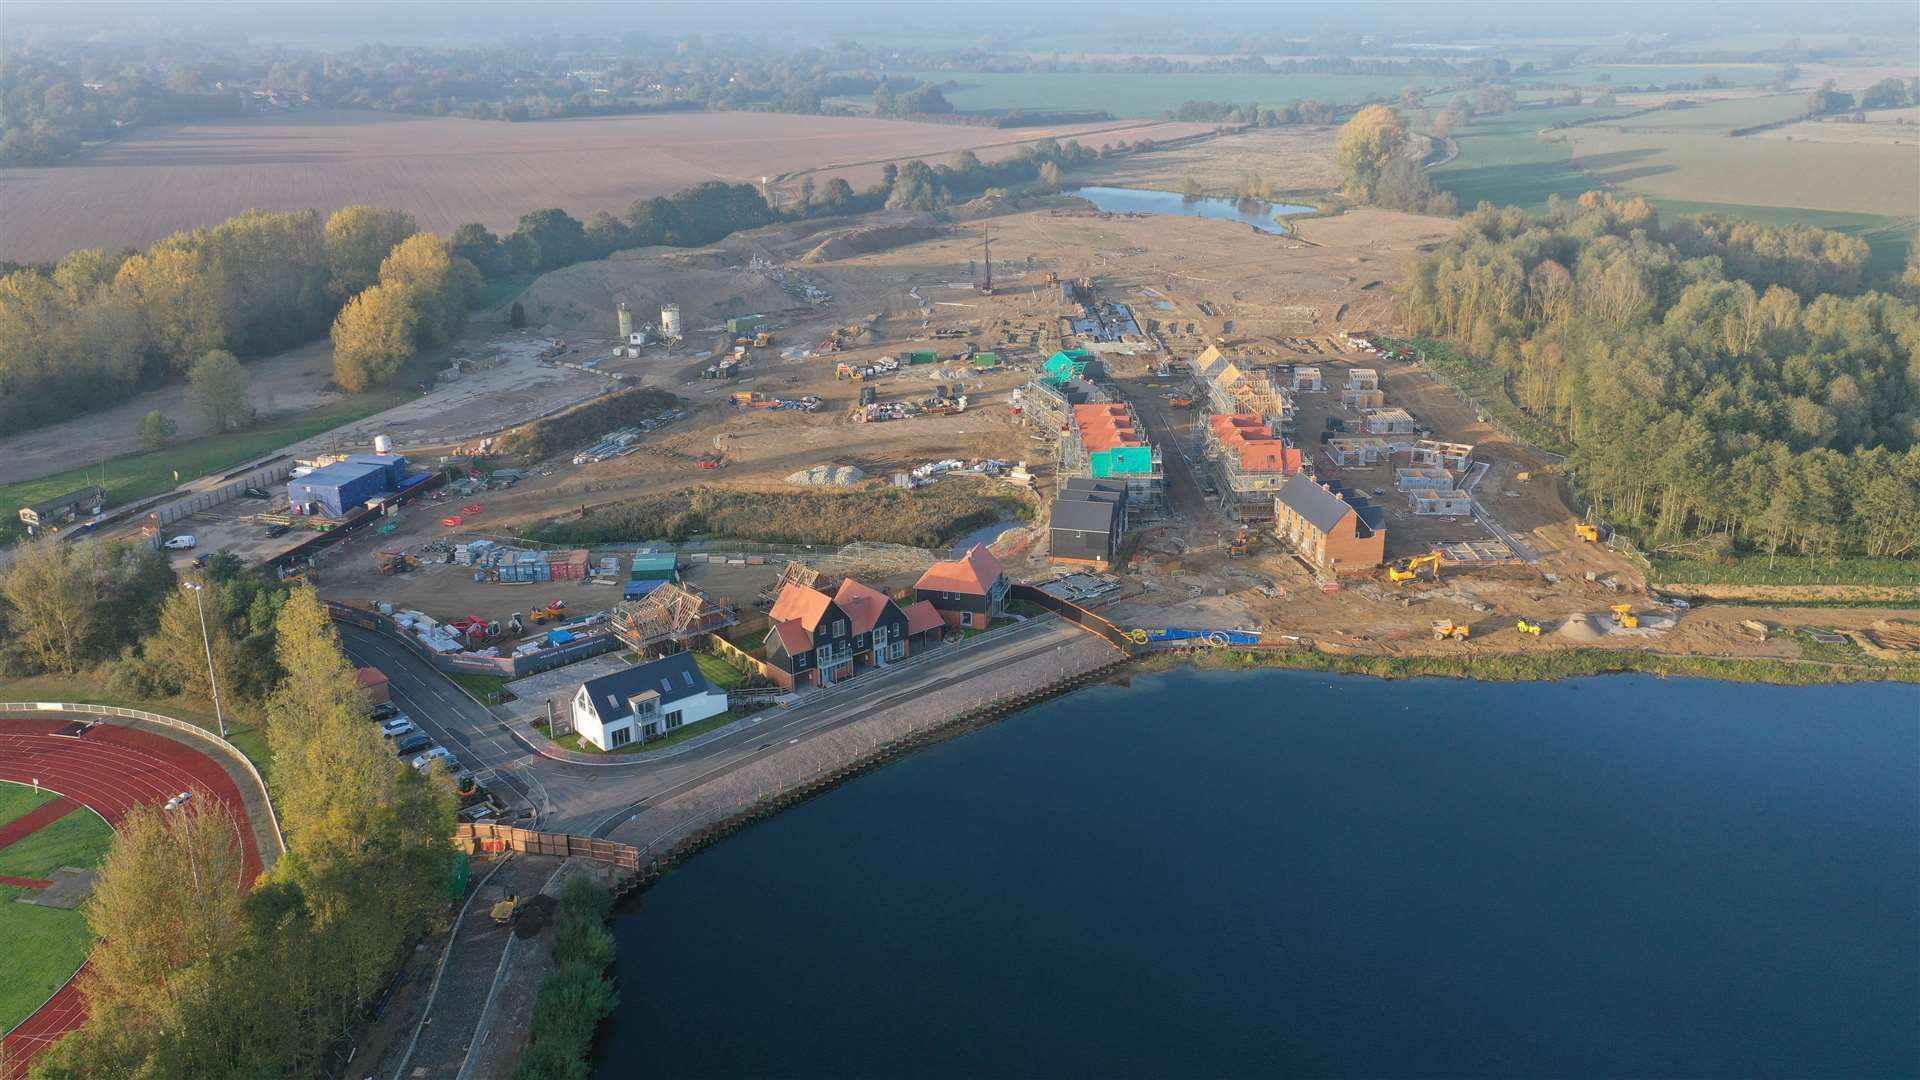 The homes around Conningbrook Lakes are being built. Picture: Vantage Photography / info@vantage-photography.co.uk